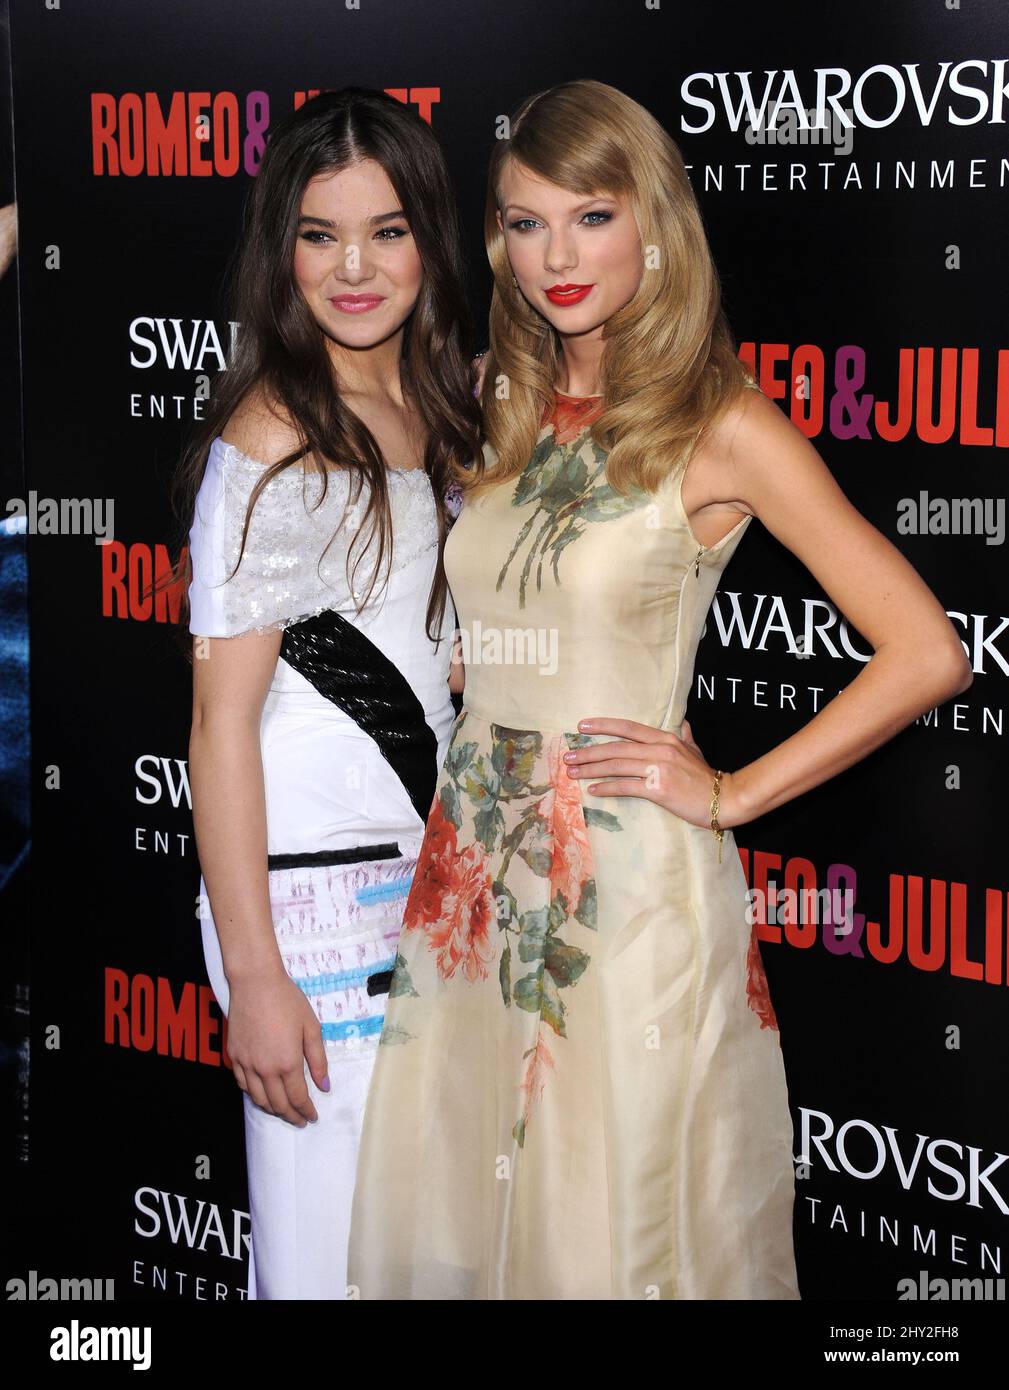 Hailee Steinfeld & Taylor Swift attending the 'Romeo & Juliet' World Premiere held at the ArcLight Cinemas Hollywood in Los Angeles, USA. Stock Photo